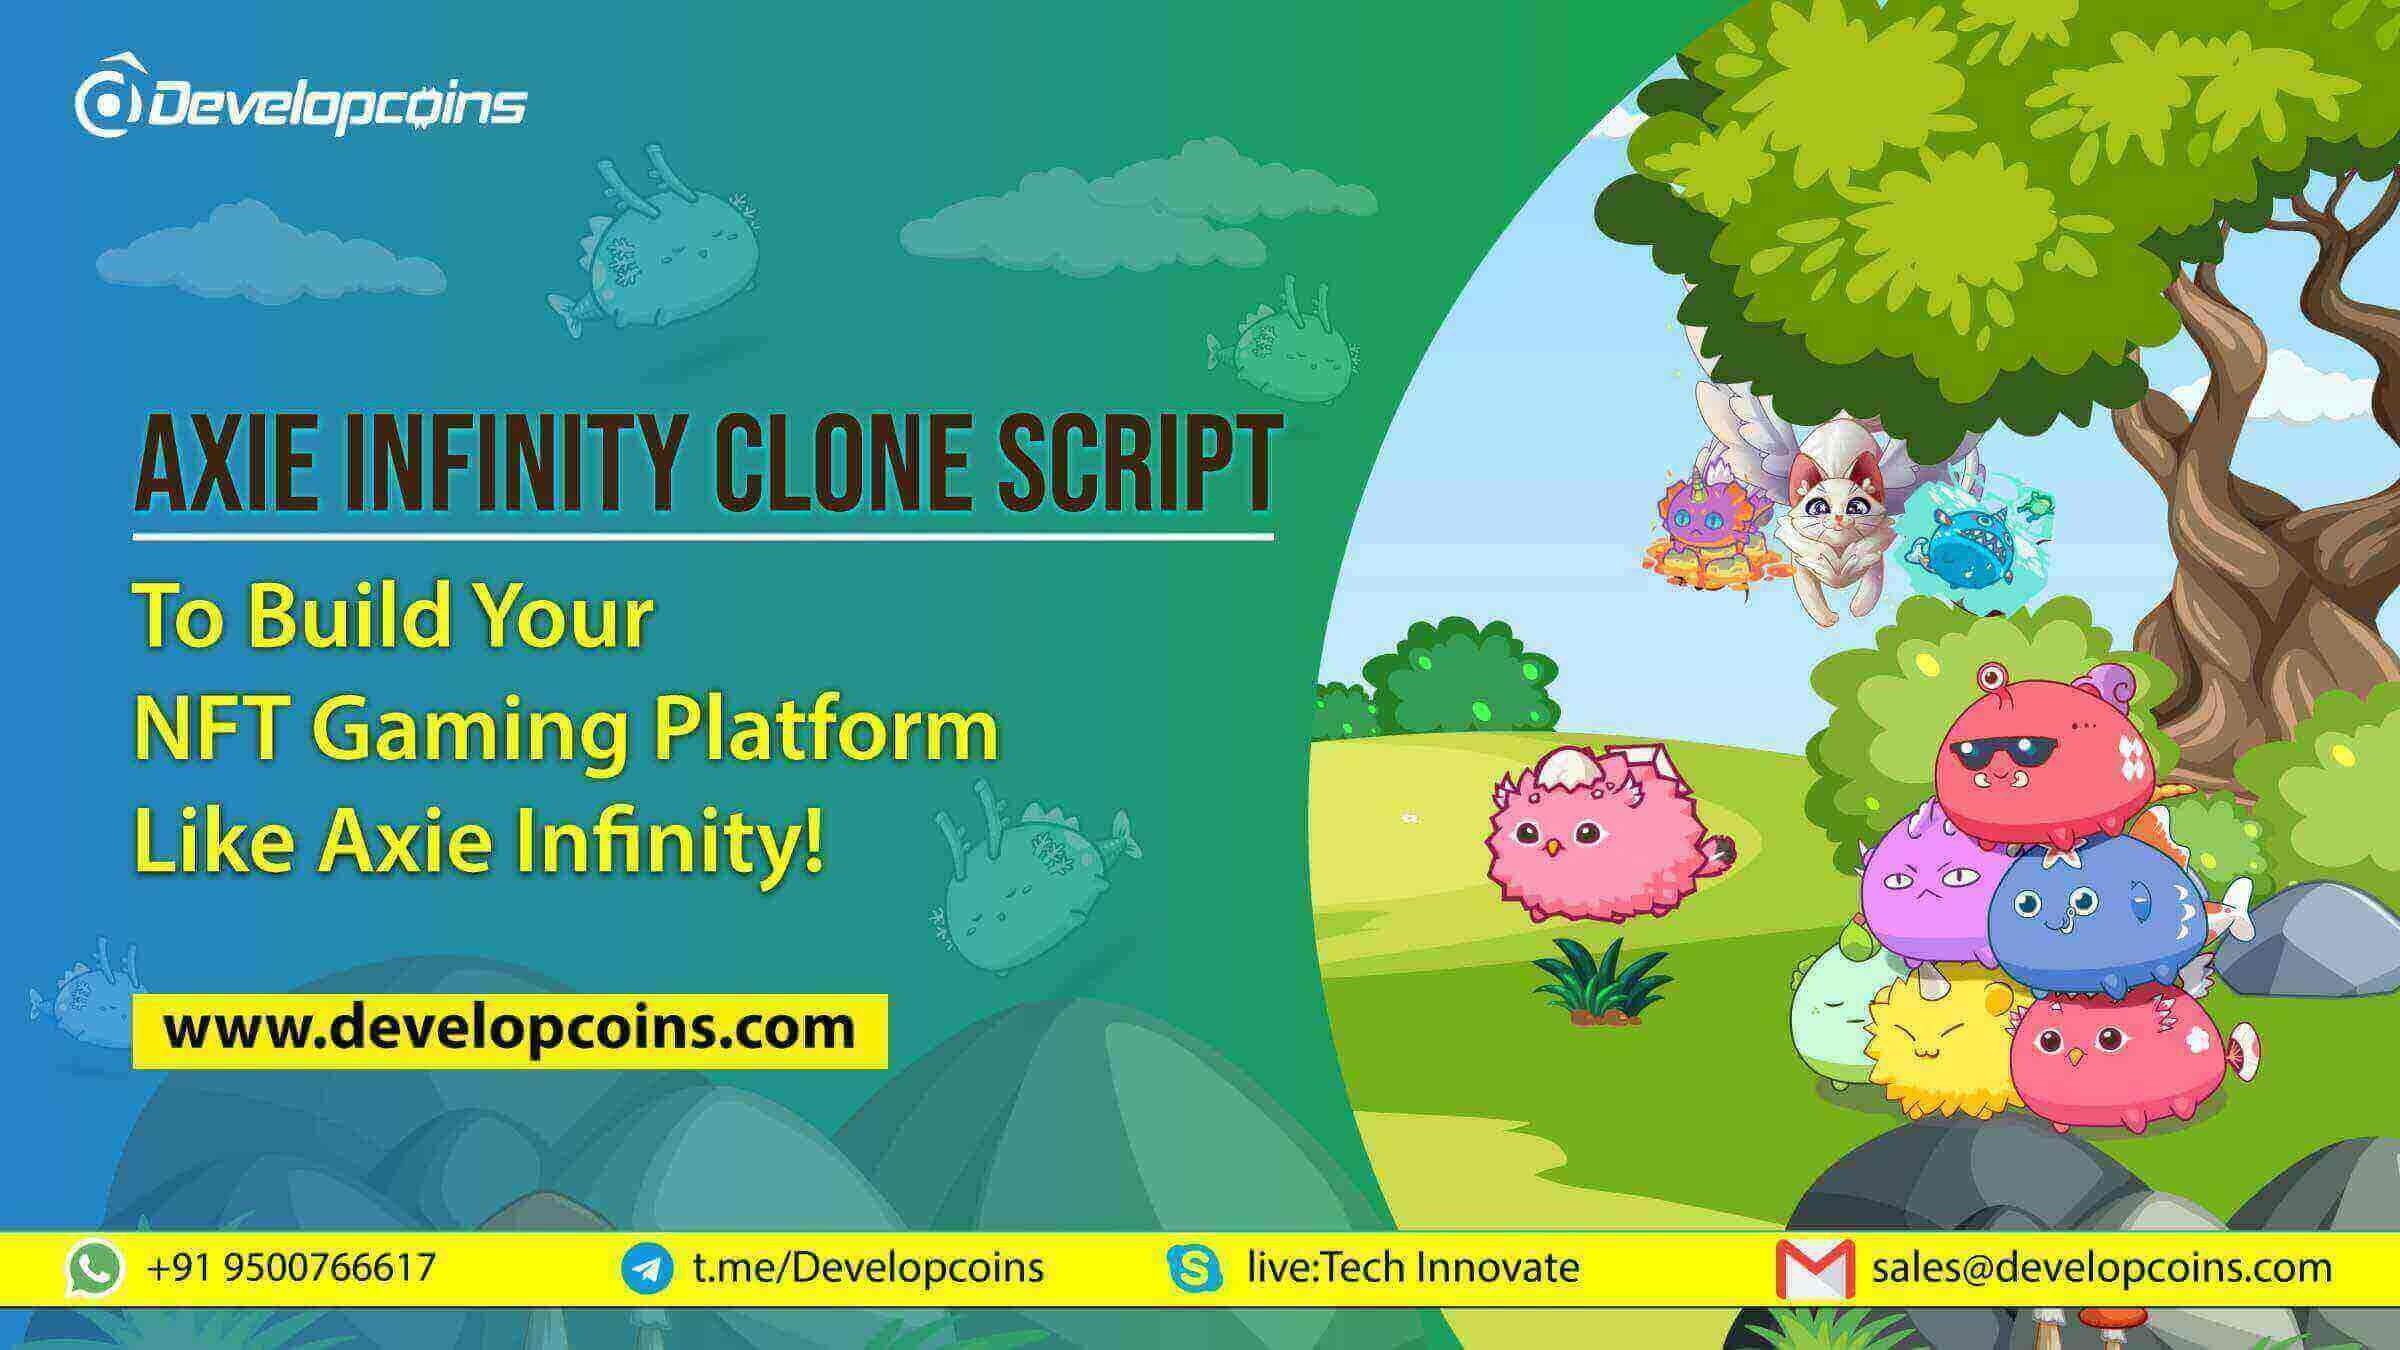 Axie Infinity Clone Script - To Build Your Own NFT Gaming Platform Like Axie Infinity